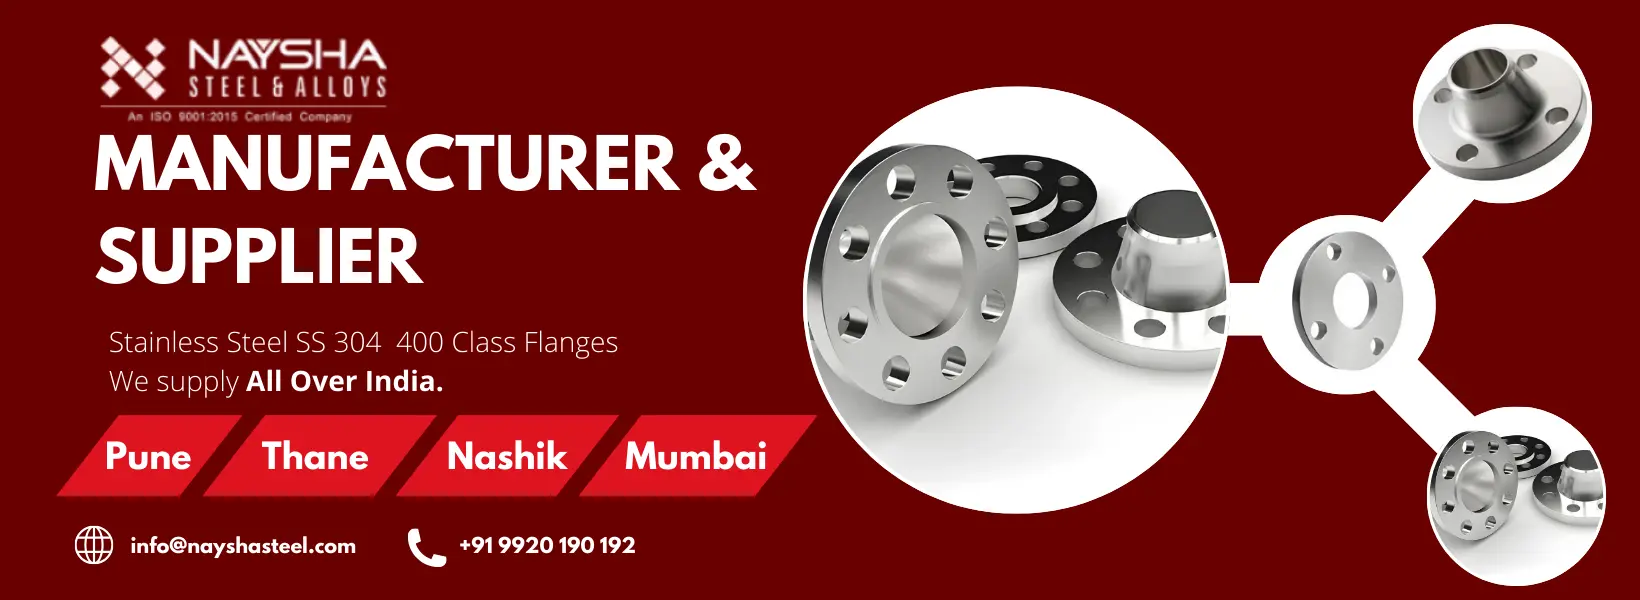 stainless steel 304 400 class flanges banner